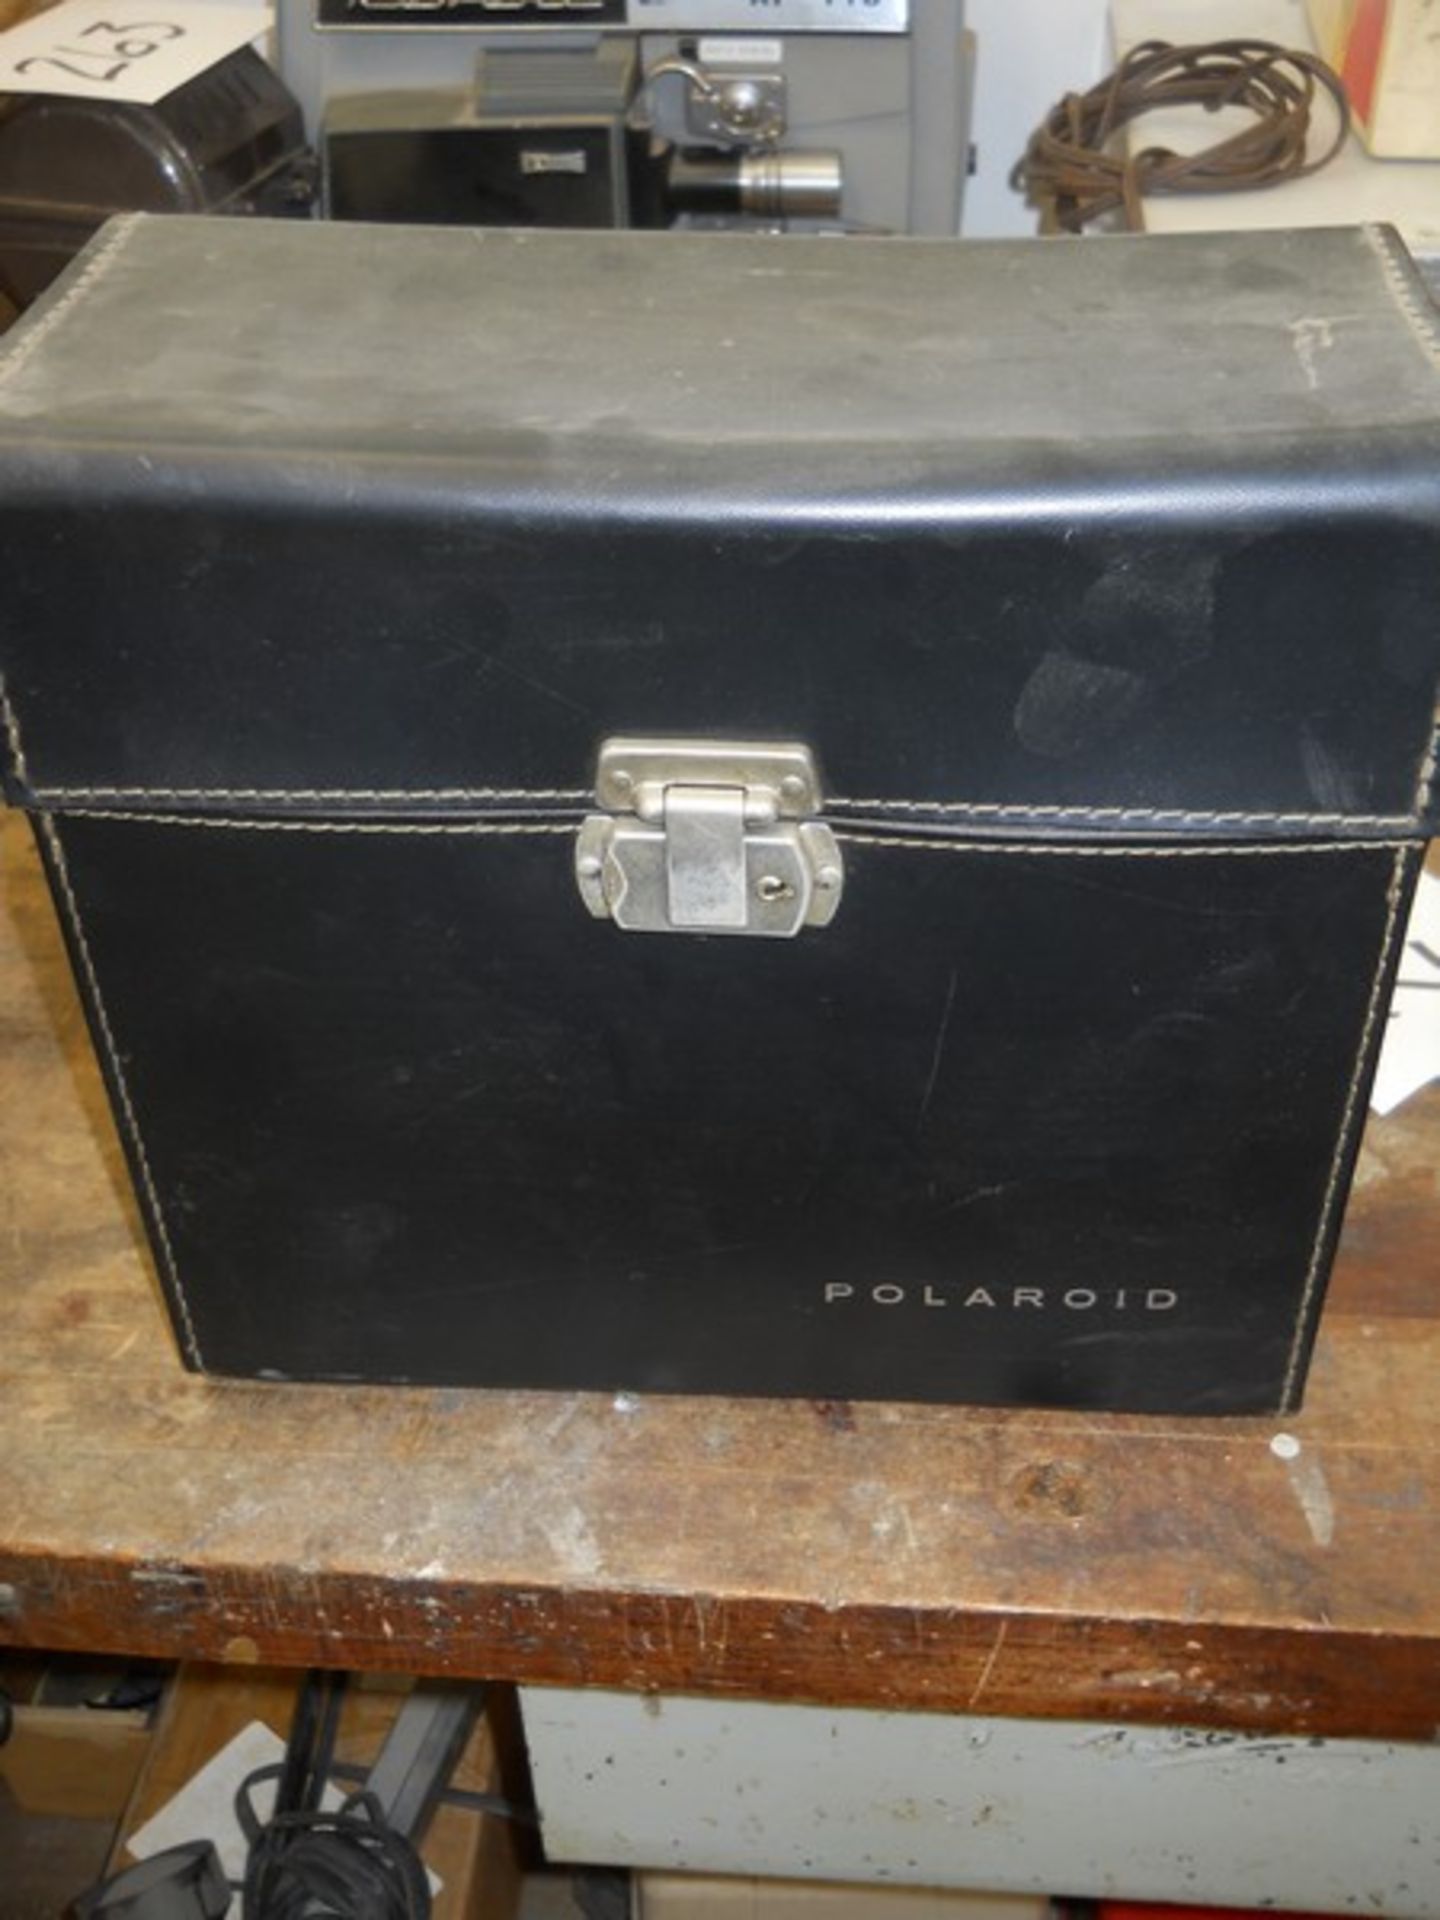 Polaroid Automatic 100 Land Camera. With Auxiliary Flash Unit, Carrying Case - Image 9 of 9